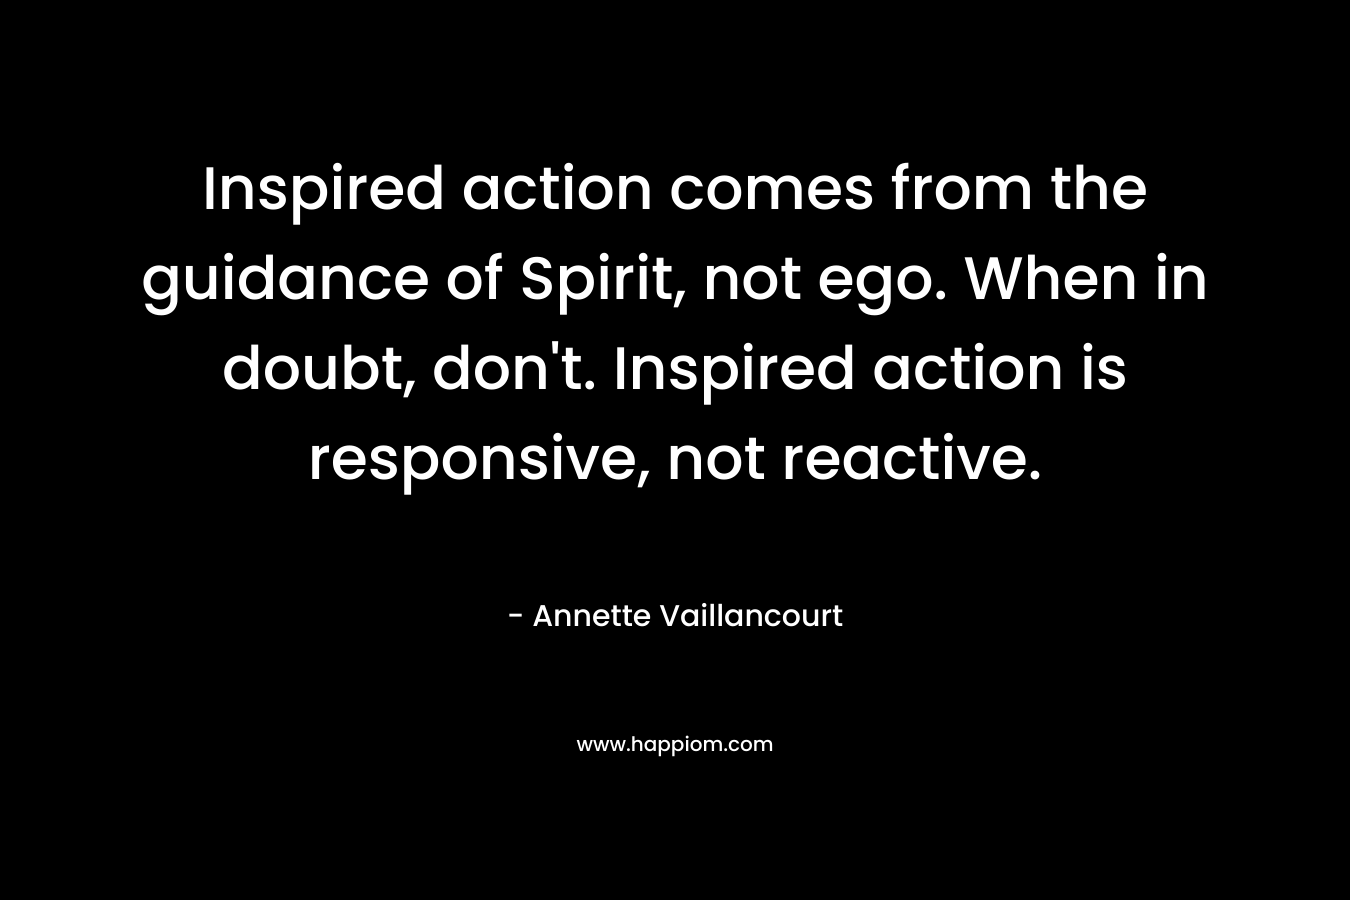 Inspired action comes from the guidance of Spirit, not ego. When in doubt, don't. Inspired action is responsive, not reactive.